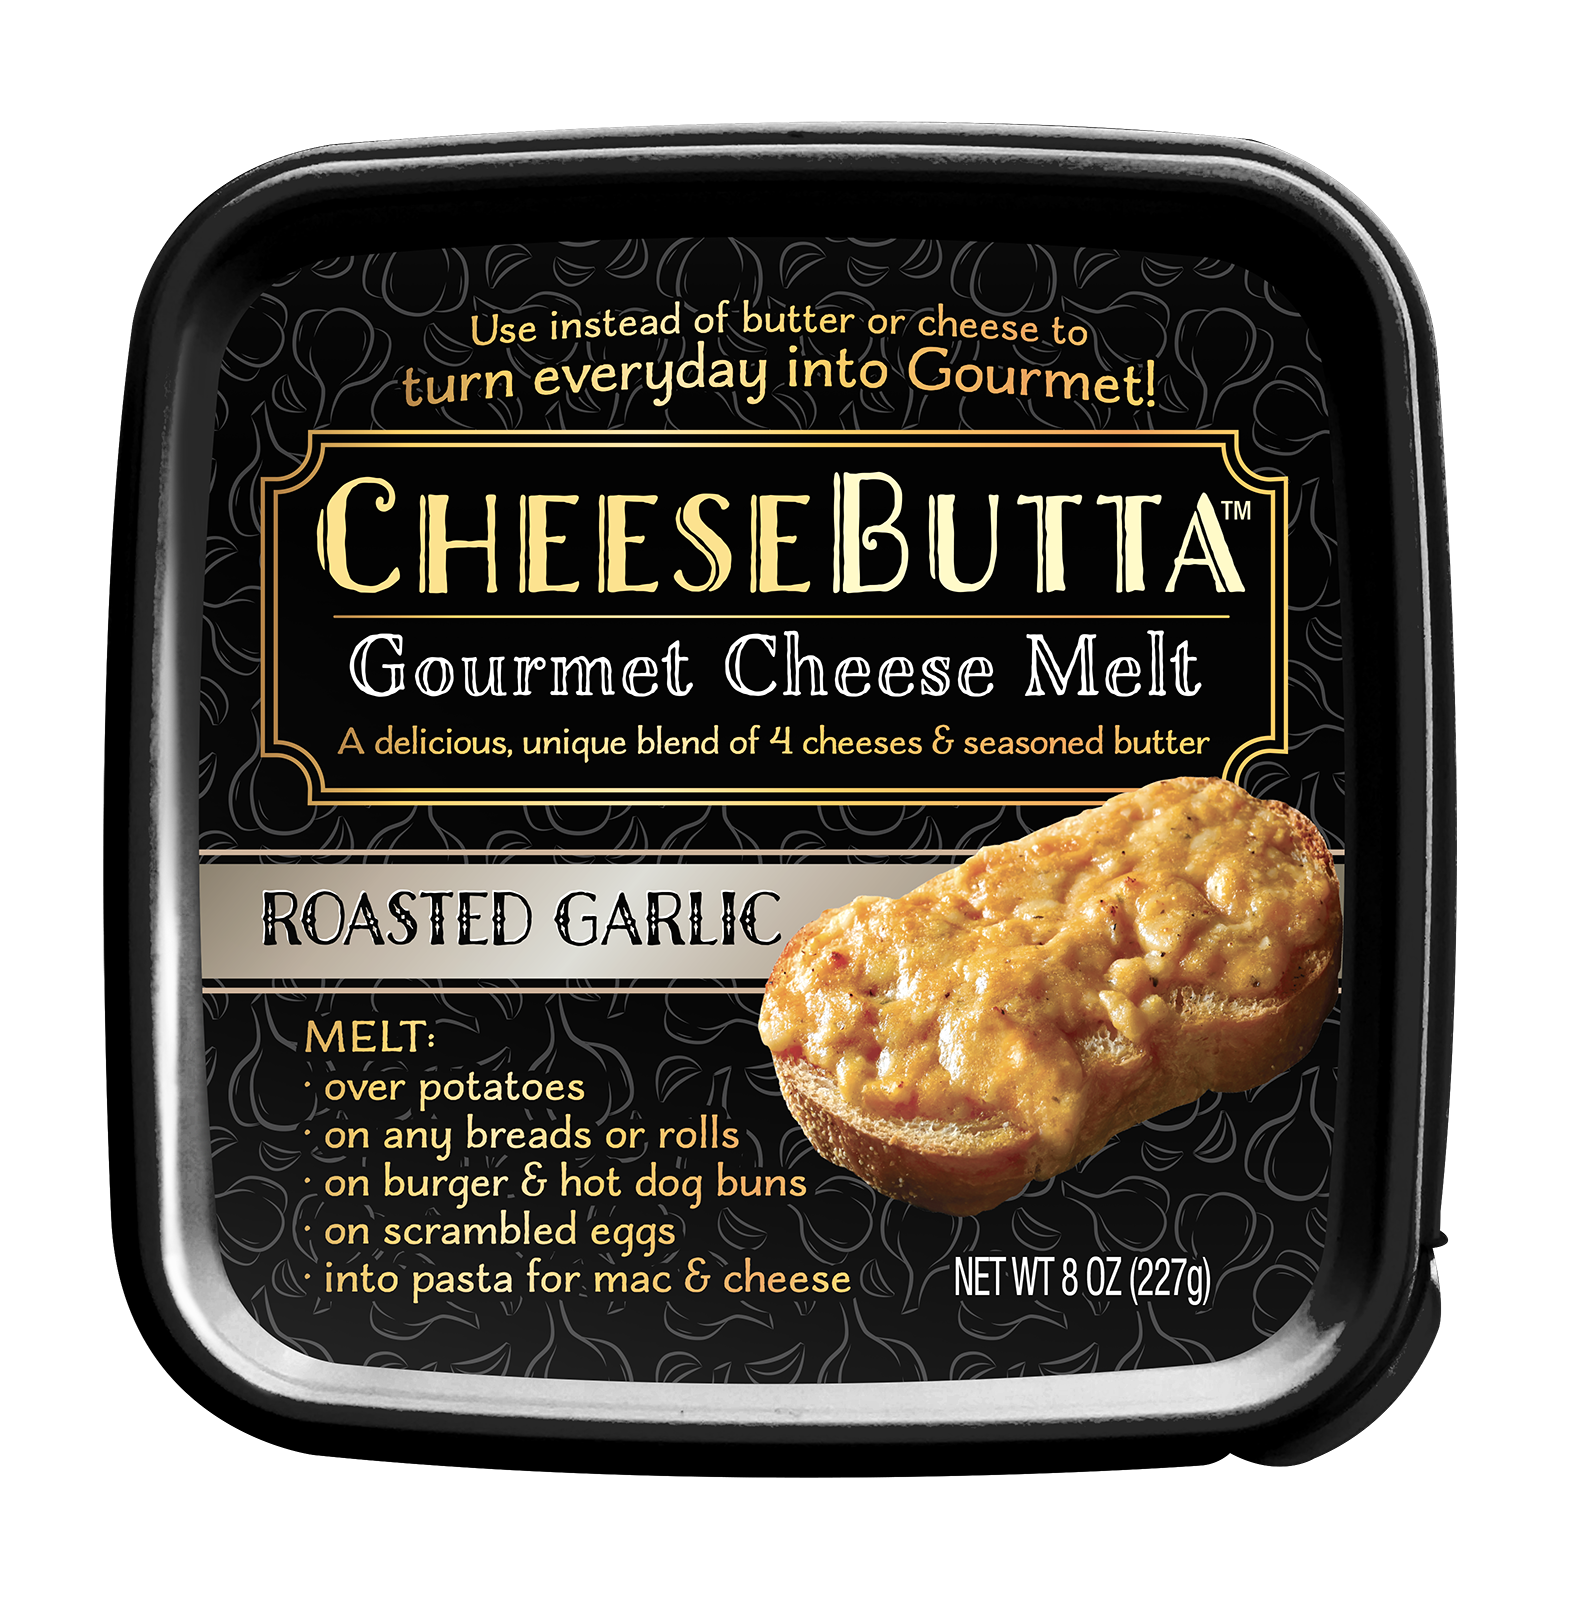 Nepra Foods to Disrupt the Mac 'n Cheese Category with Their First-ever High Protein, Plant-Based, Gluten and Dairy-Free Alternative